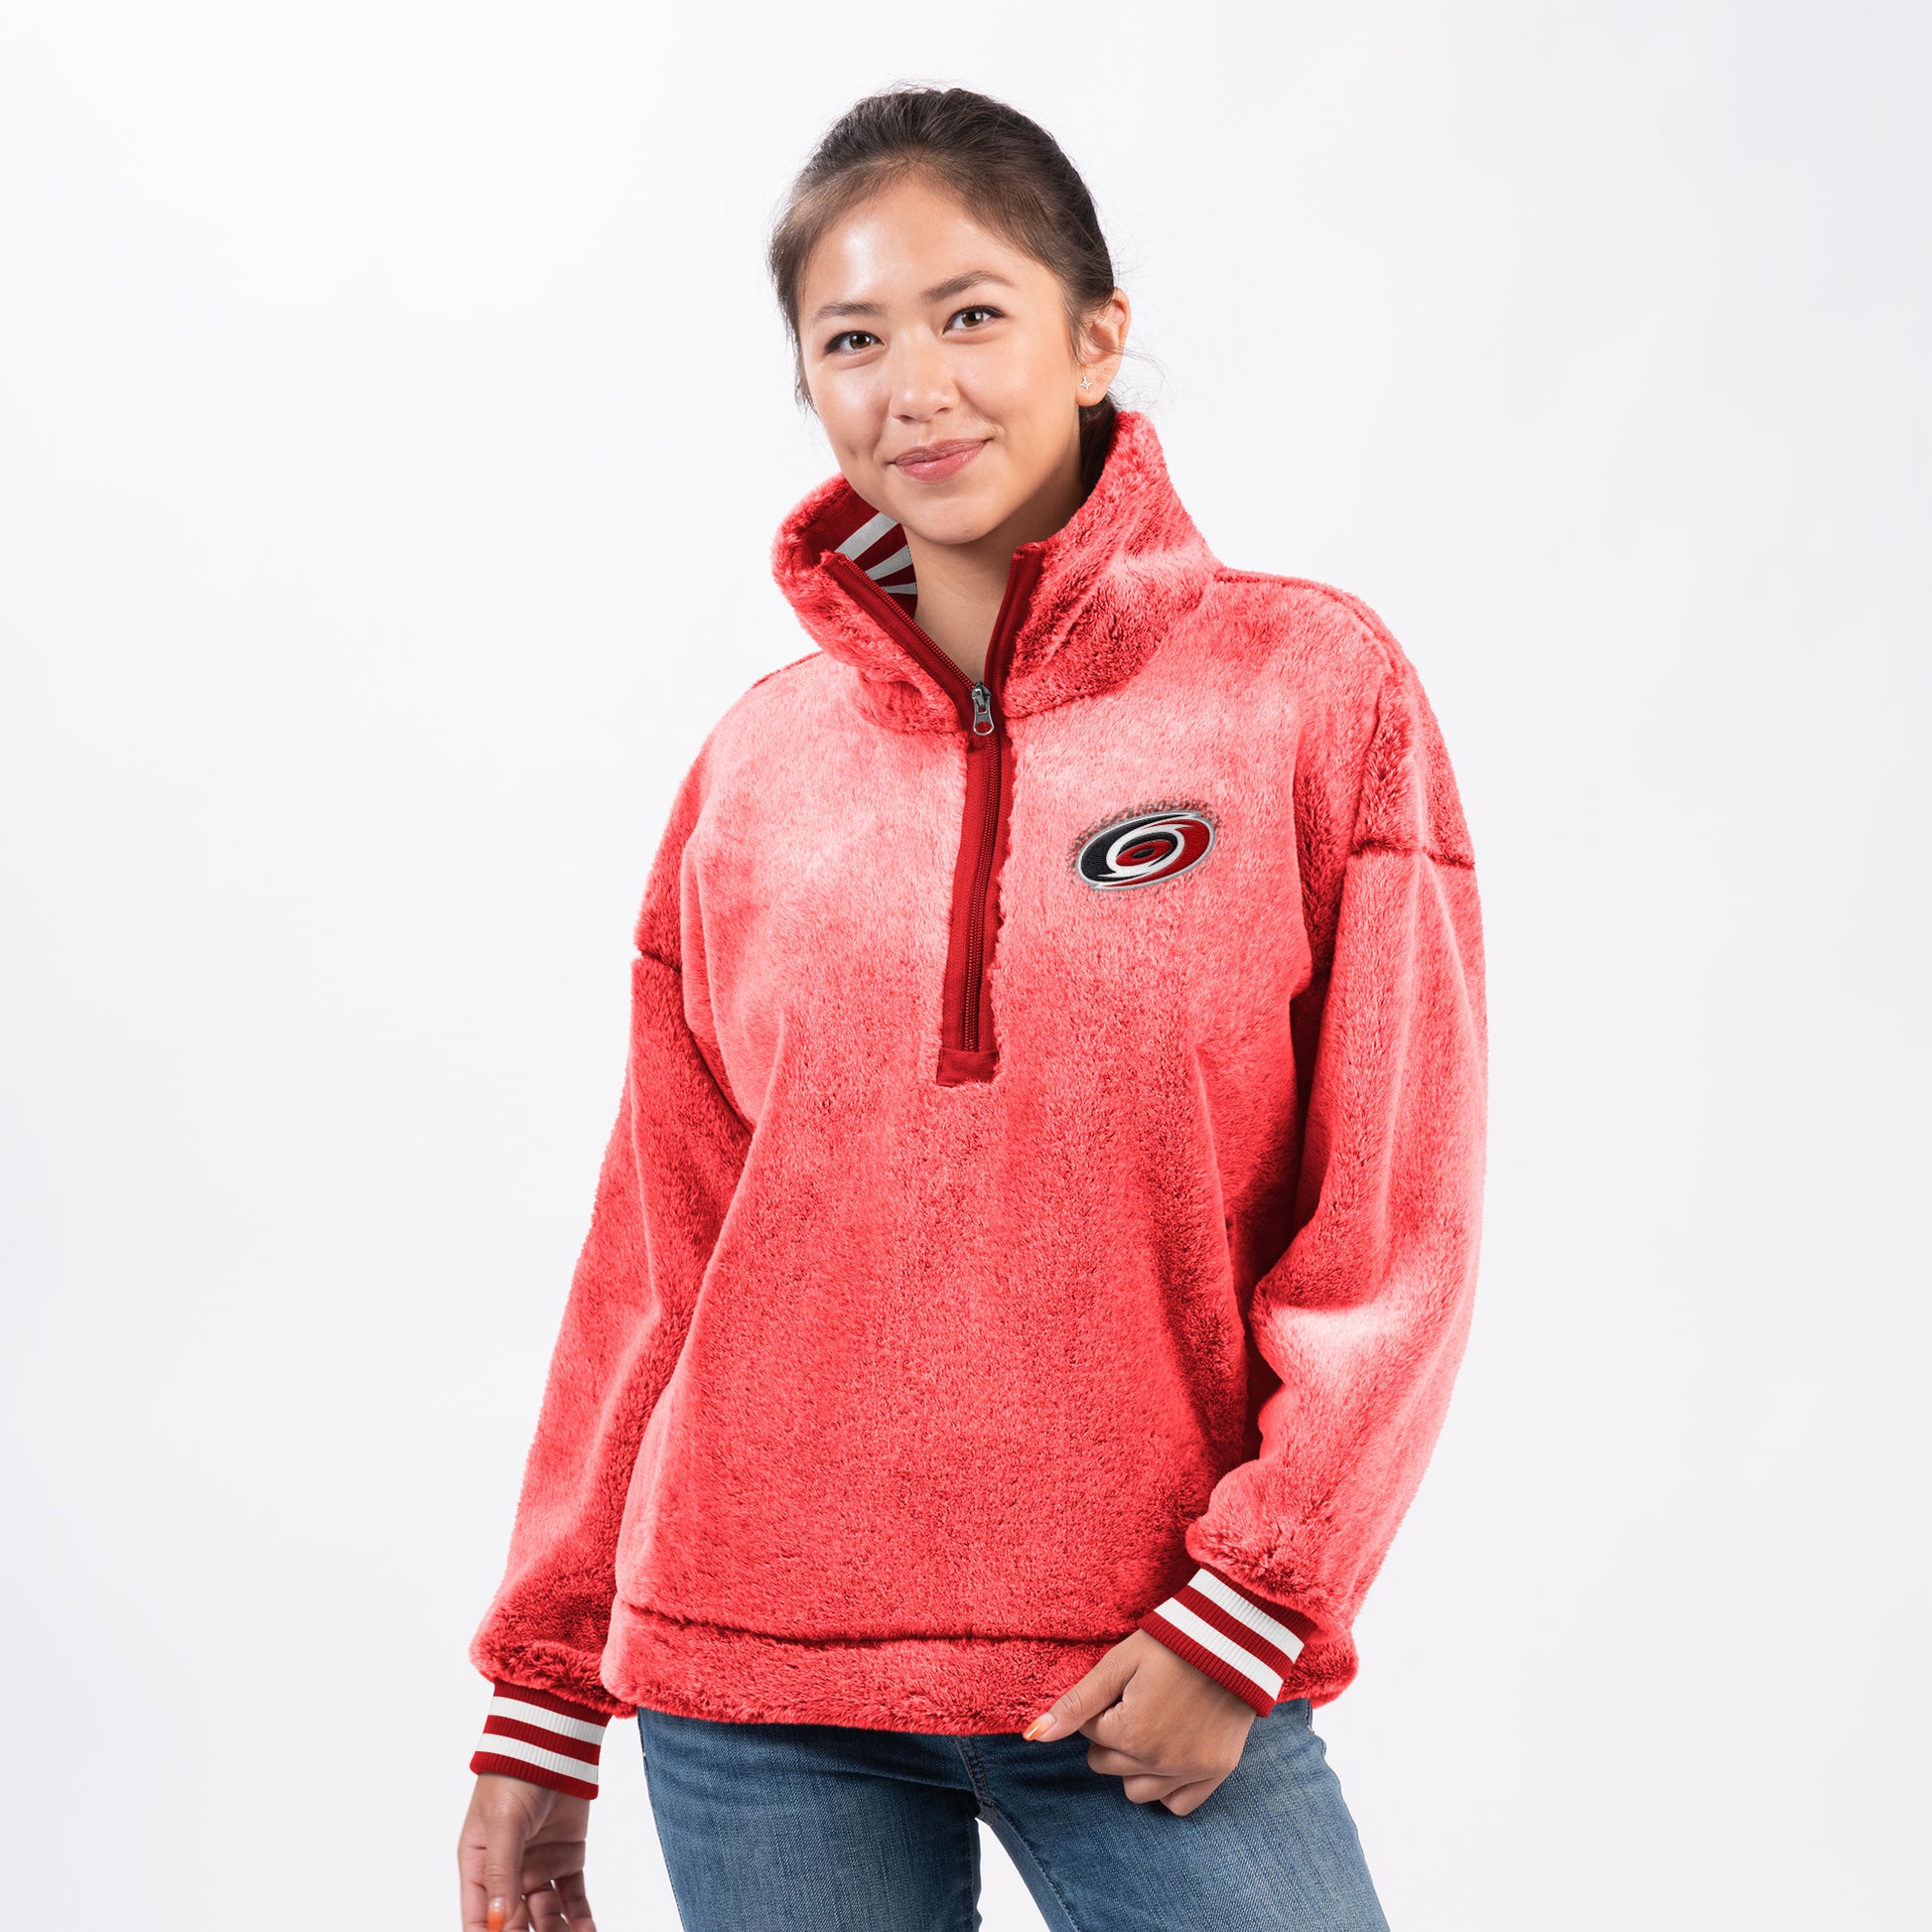 Front: Fluffy red quarter zip with collar and Hurricanes logo on left chest